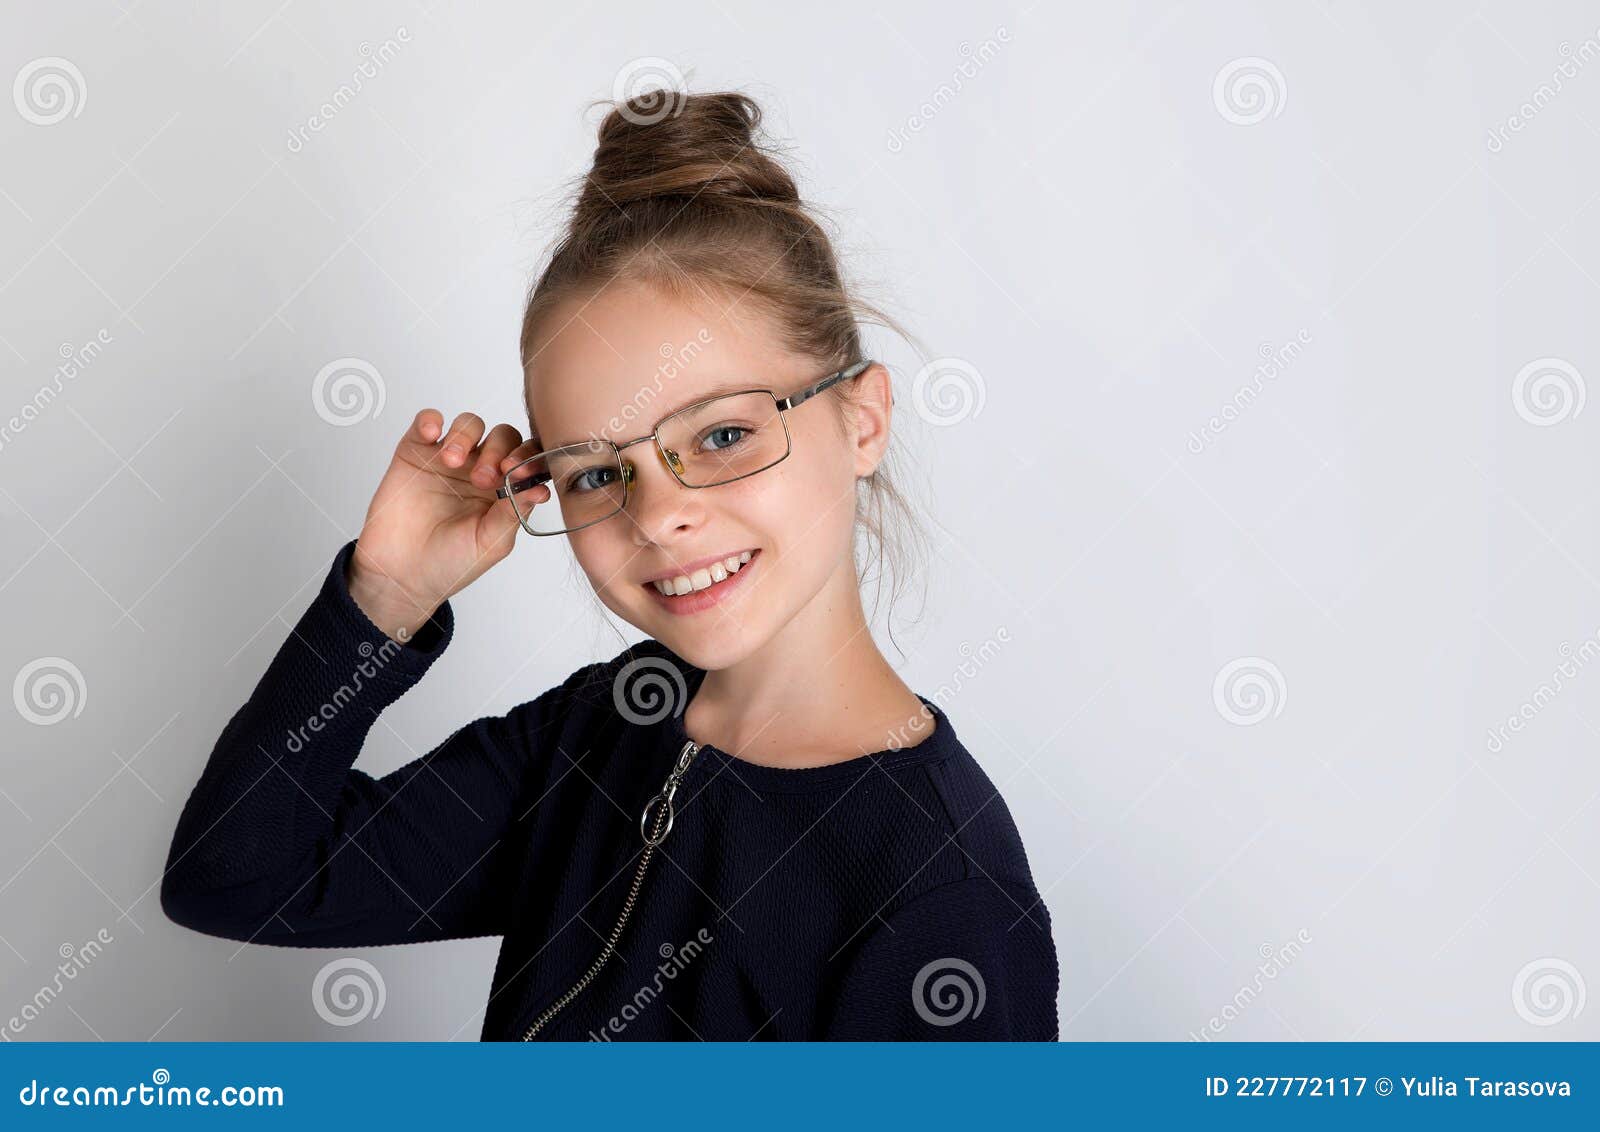 Free Images : person, child, blue, hairstyle, close up, face, nose, fun ...